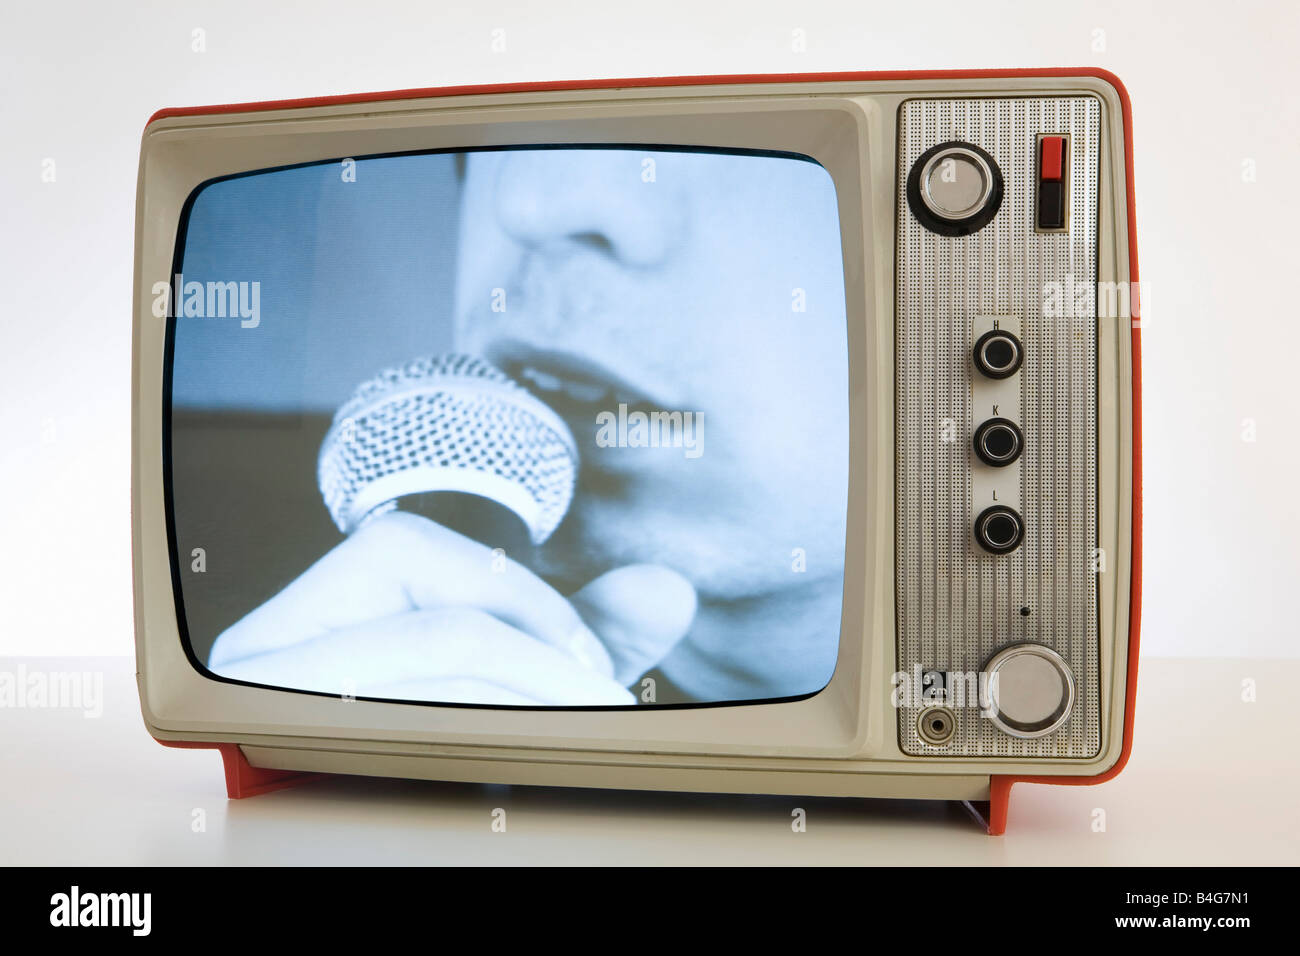 A television with a black and white image of a person singing into a microphone Stock Photo